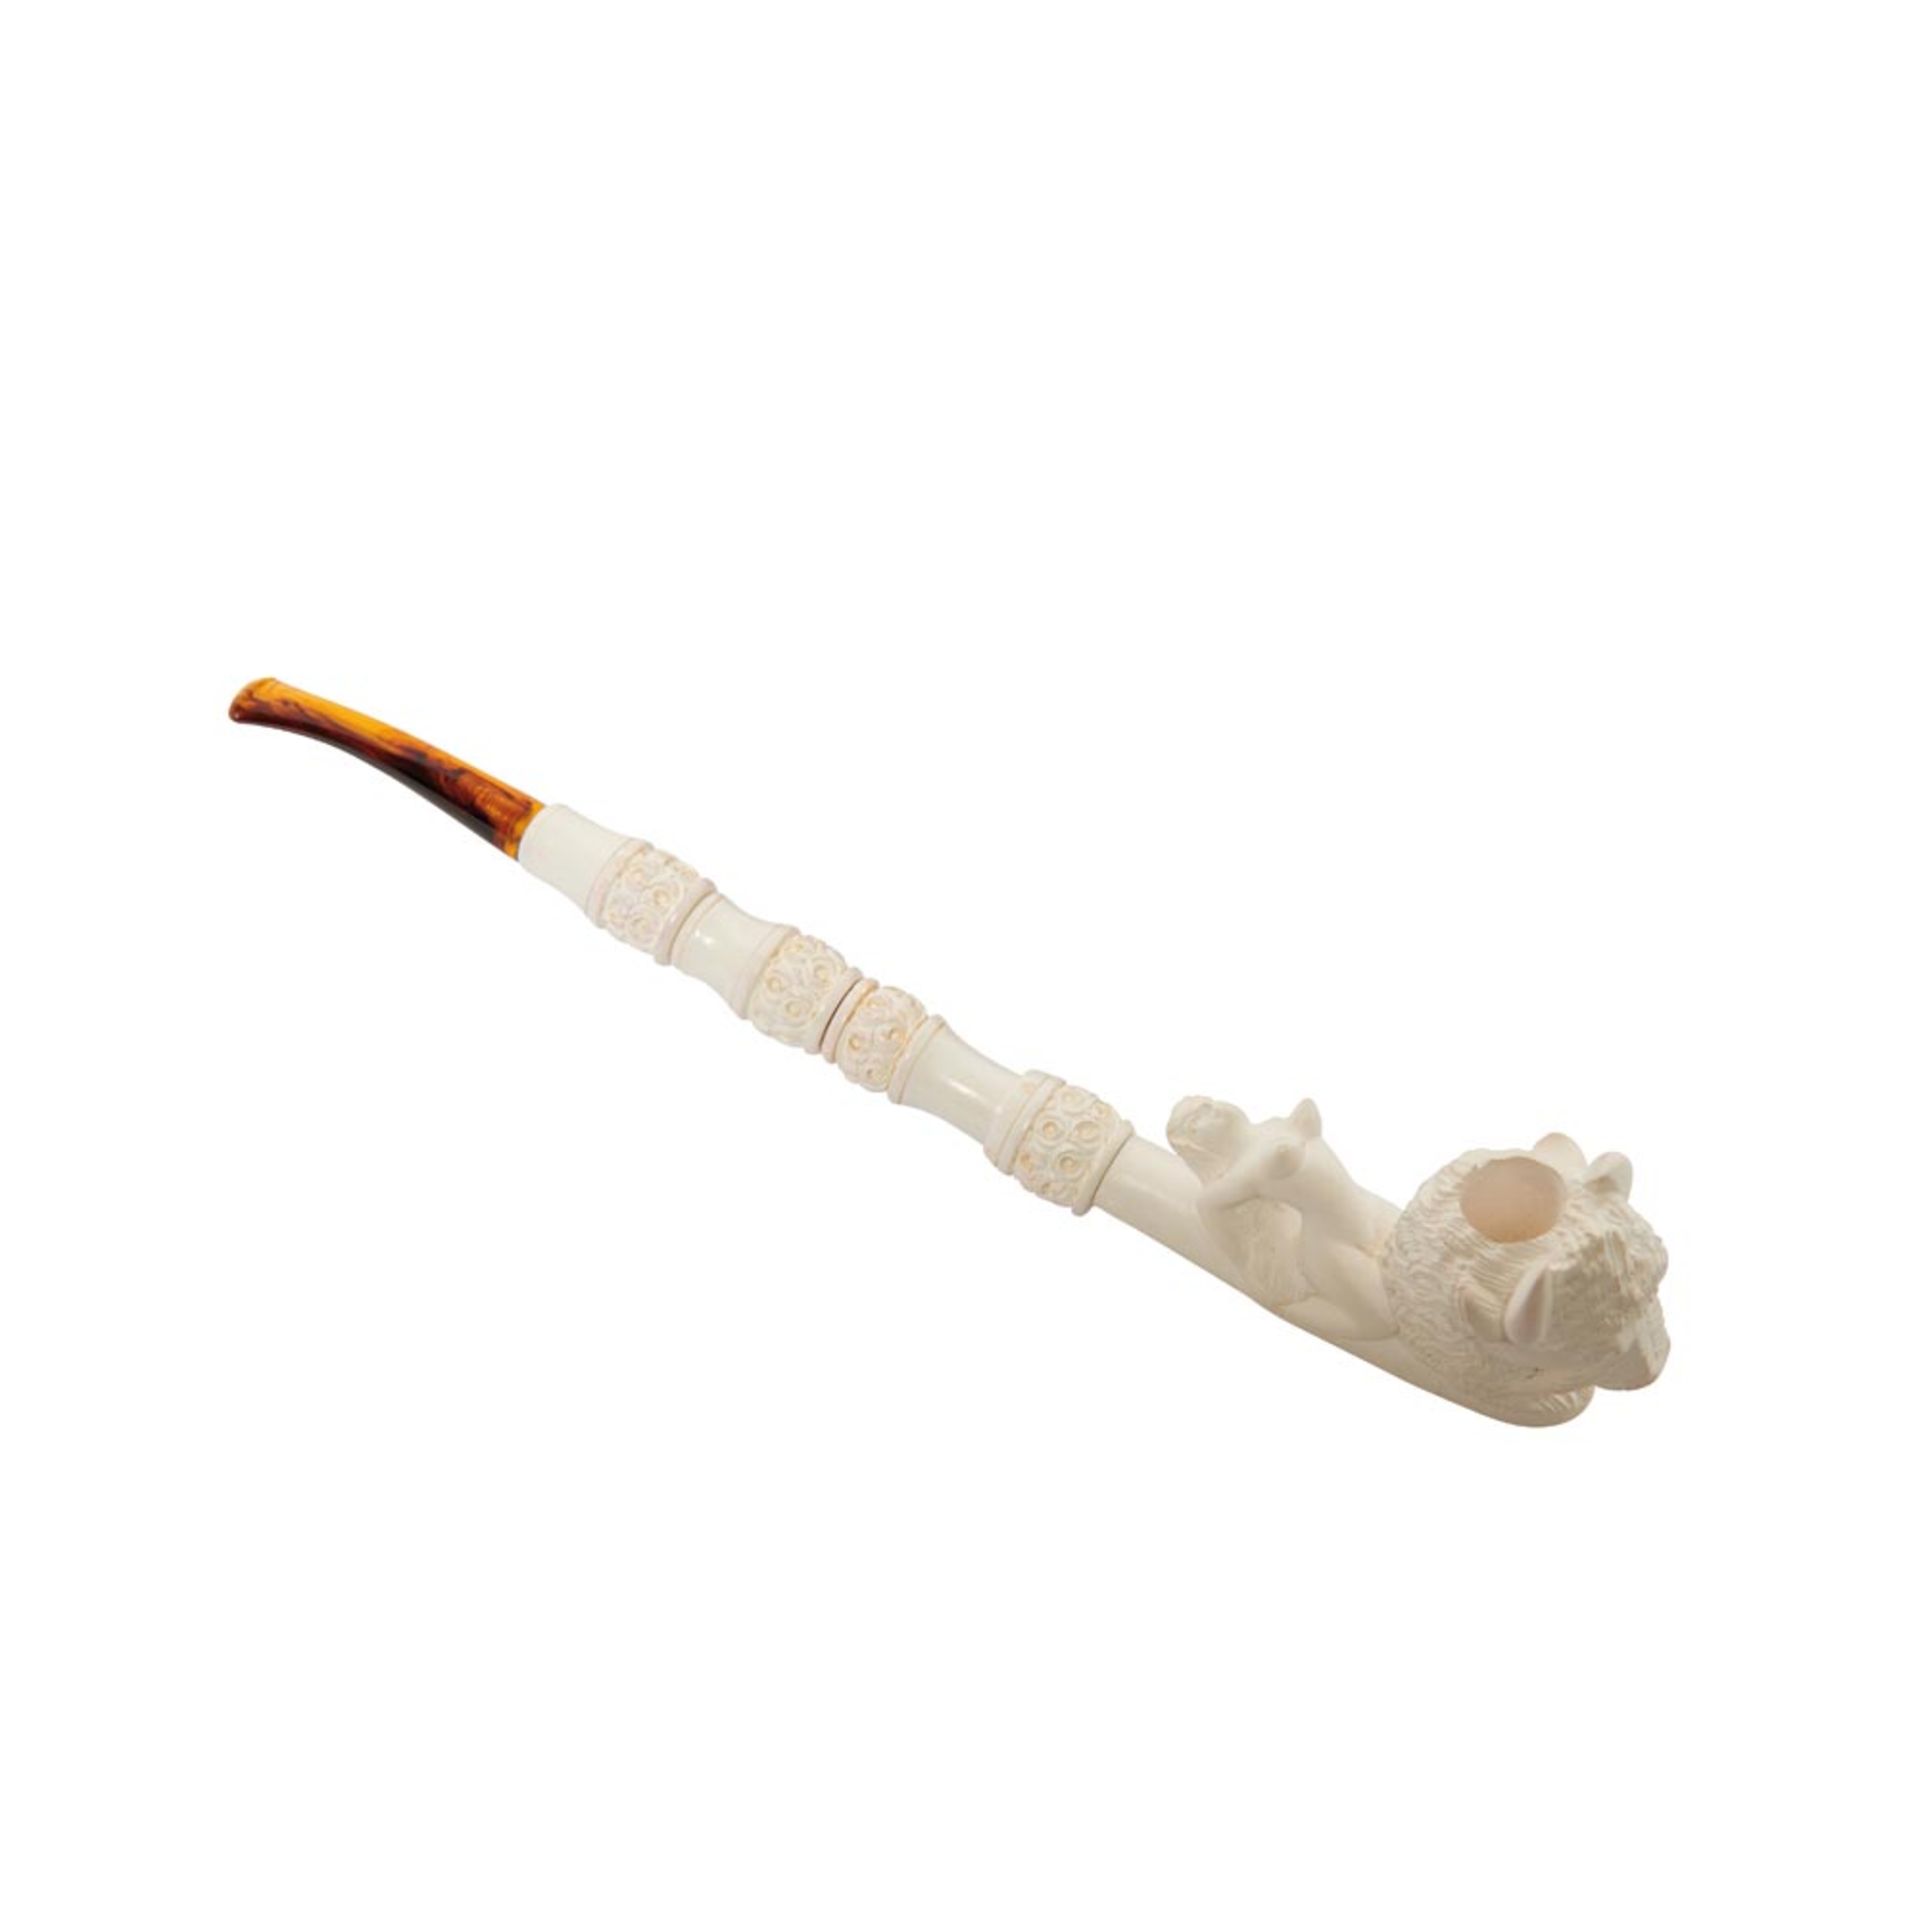 Meerschaum and celluloid pipe